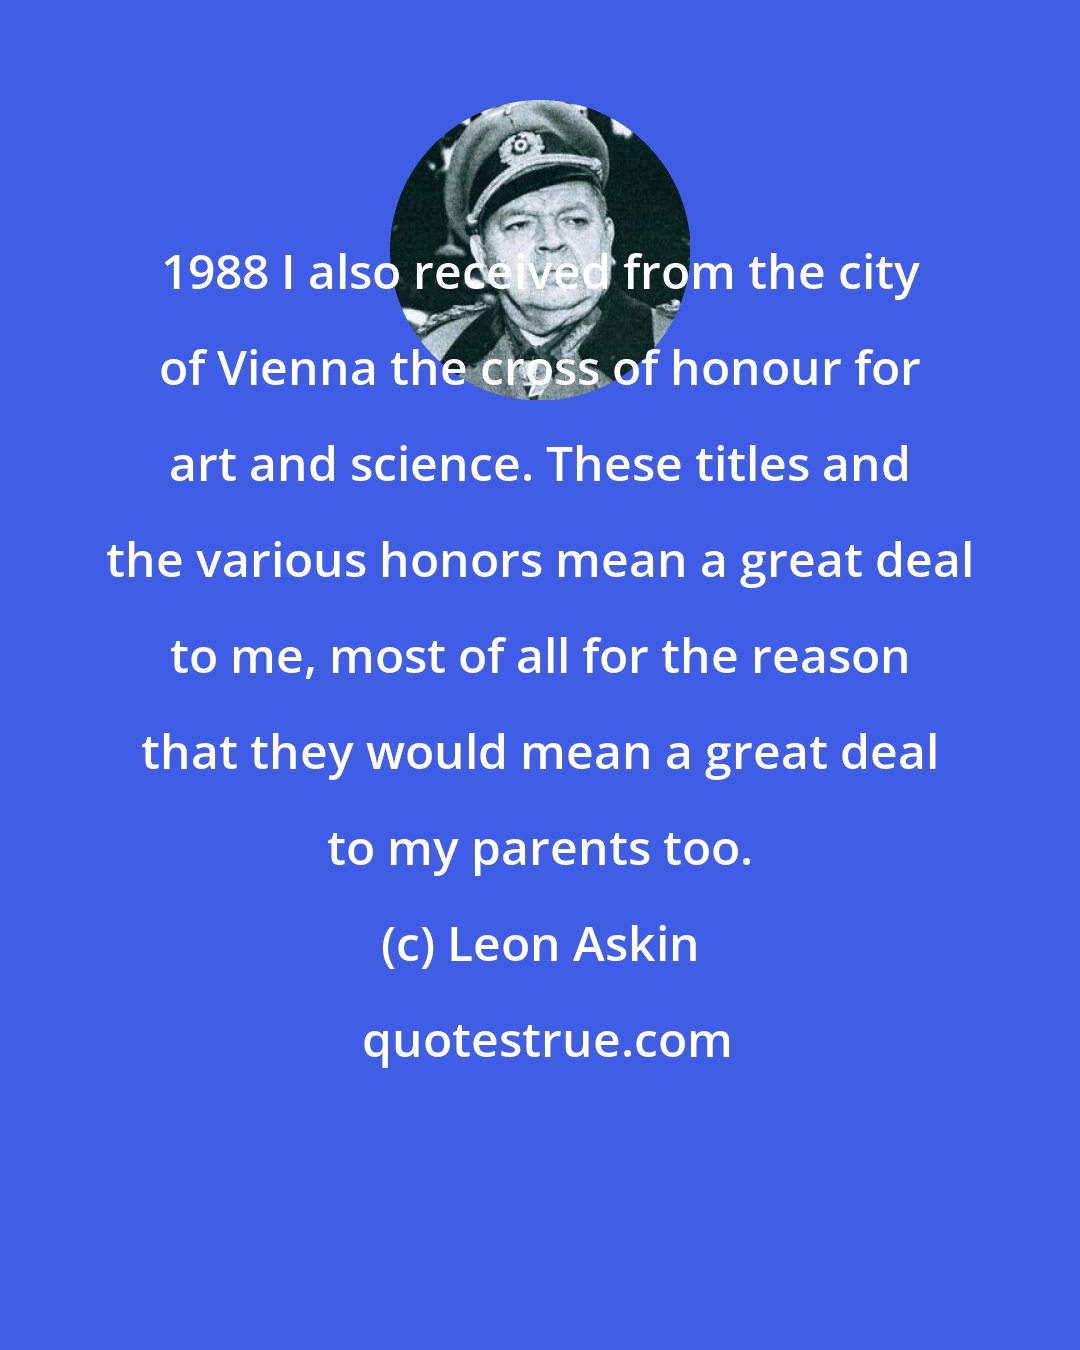 Leon Askin: 1988 I also received from the city of Vienna the cross of honour for art and science. These titles and the various honors mean a great deal to me, most of all for the reason that they would mean a great deal to my parents too.